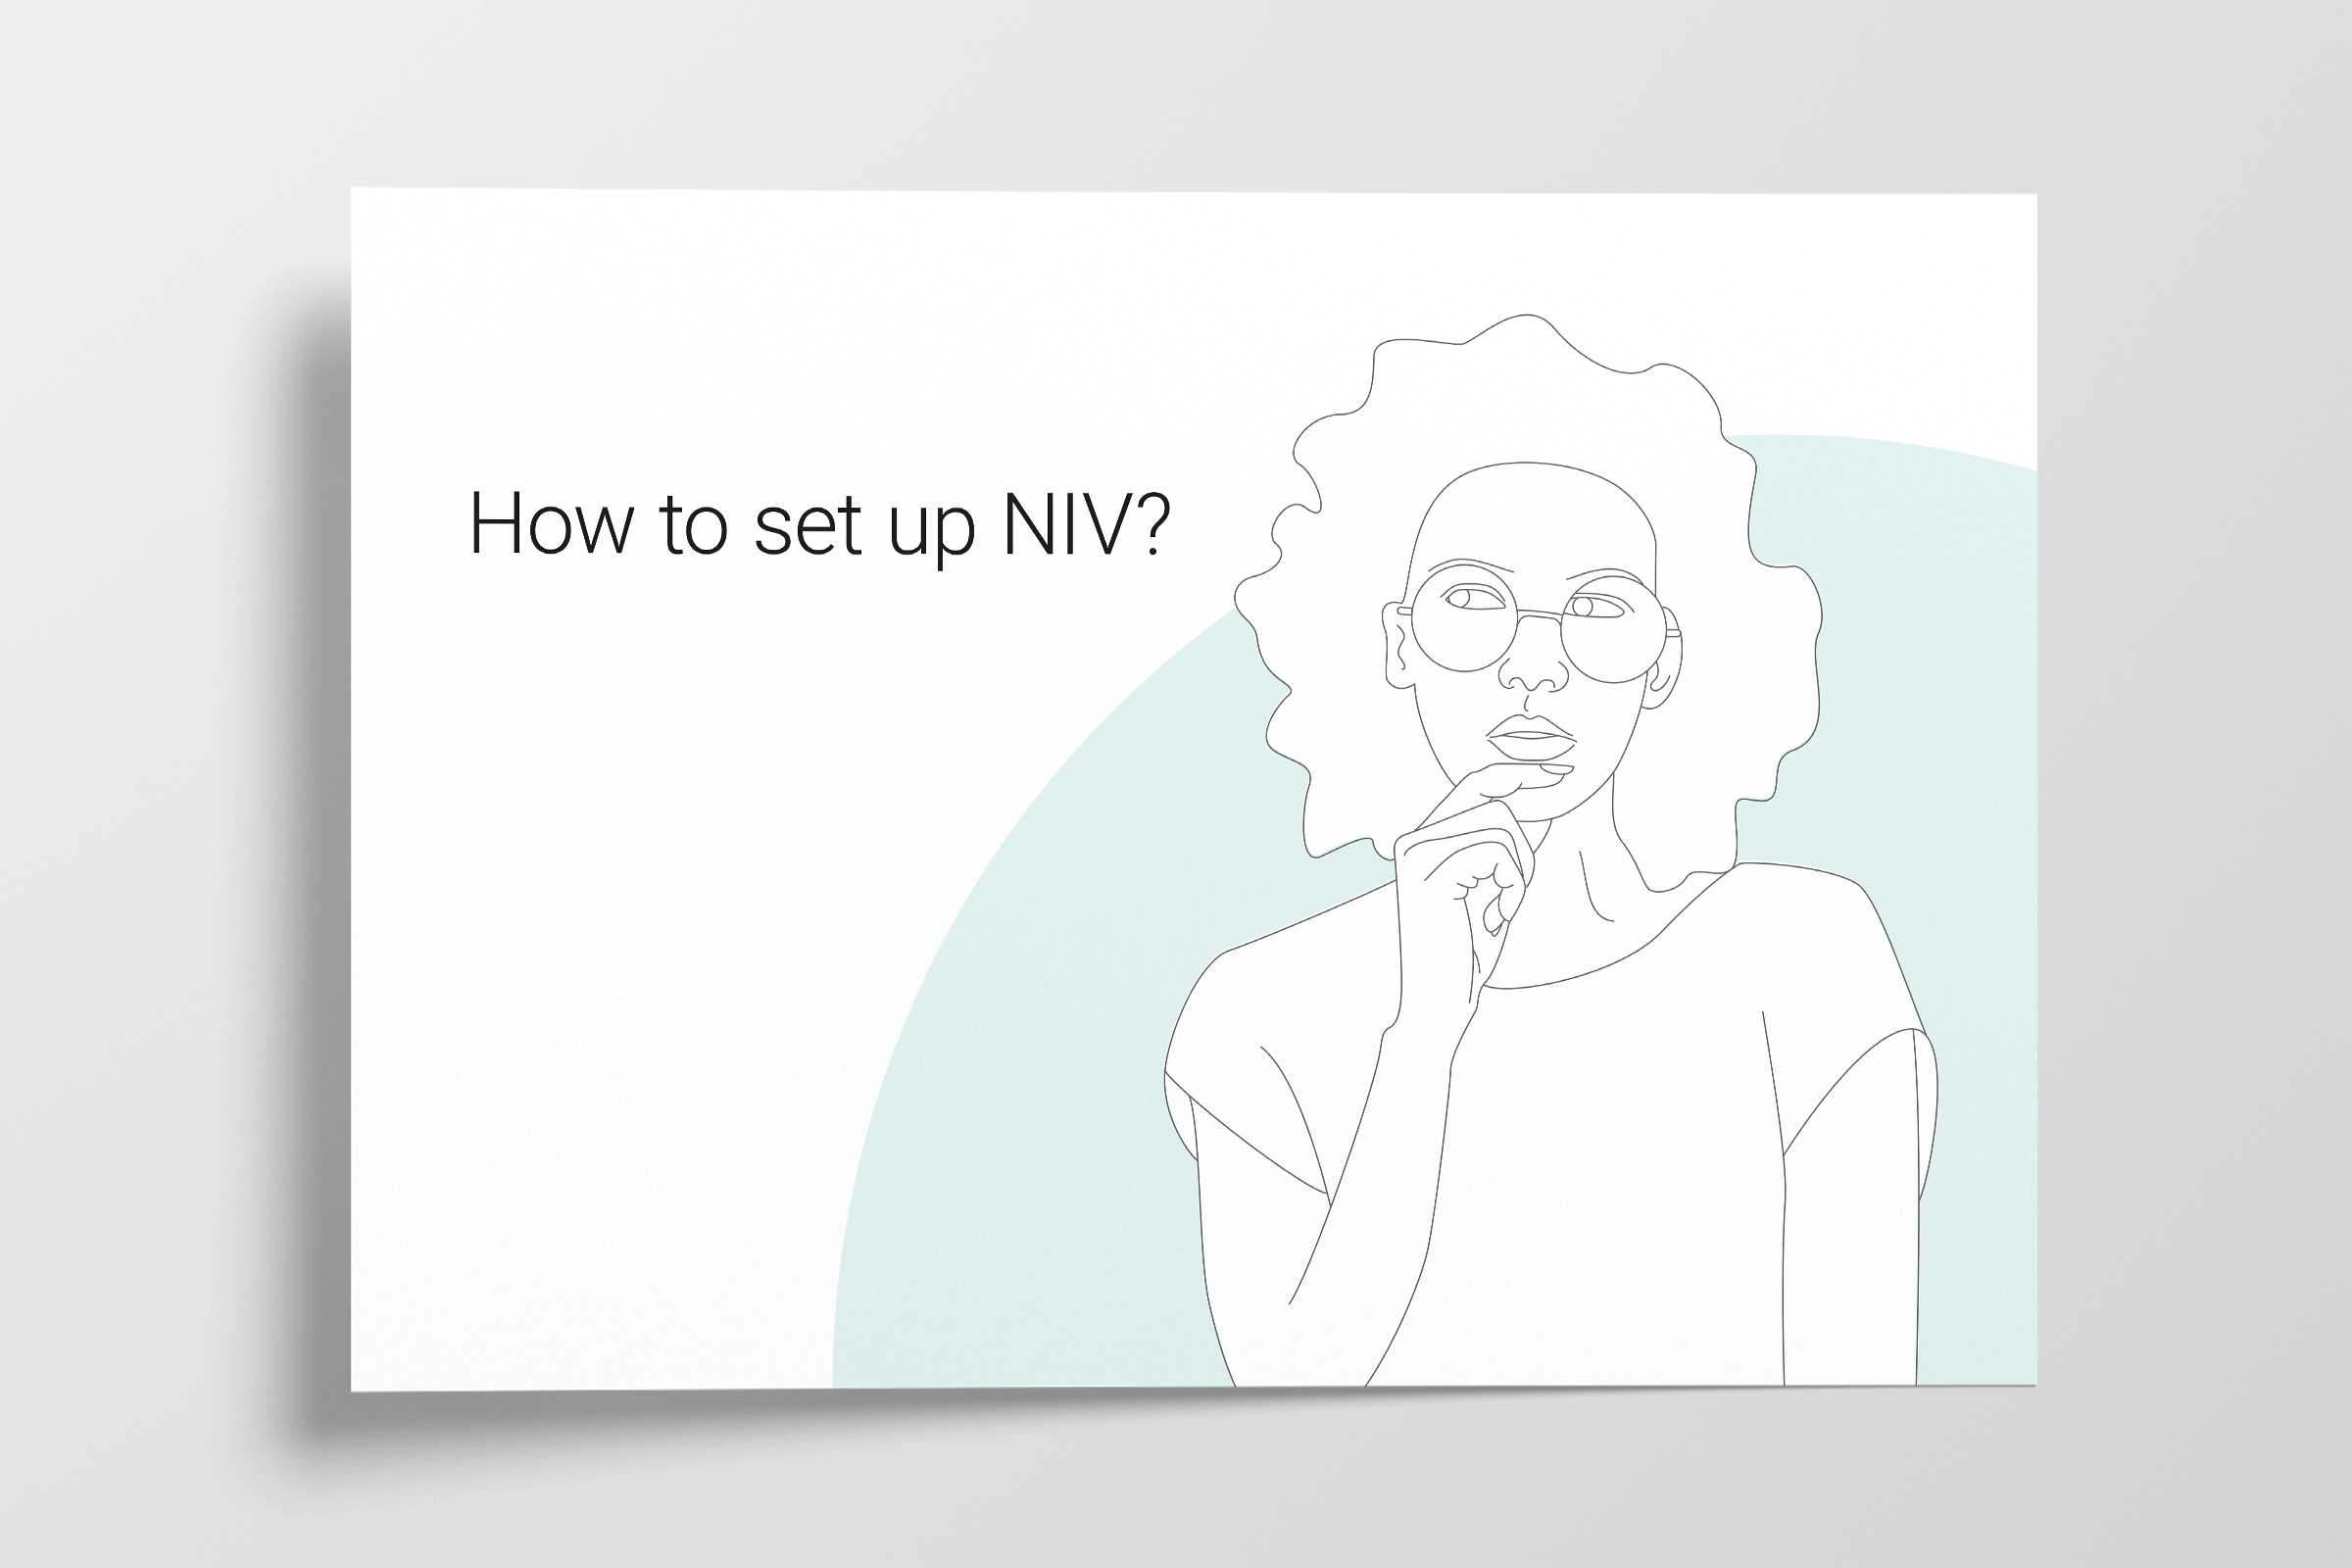 Illustration for the chapter "How to set up NIV?"